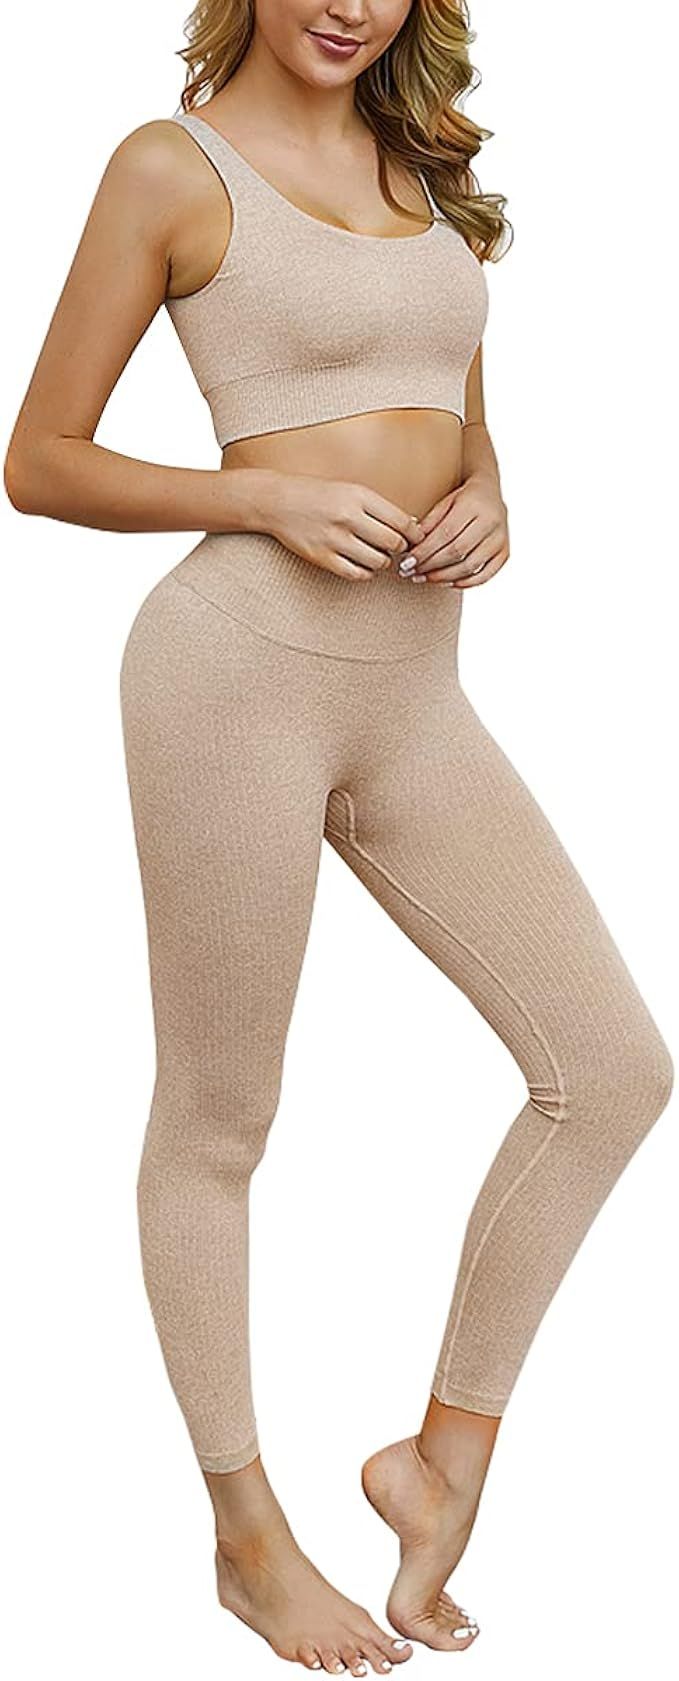 Yaavii Workout Outfits for Women Ribbed Seamless 2 Piece High Waist Yoga Leggings Sets | Amazon (US)